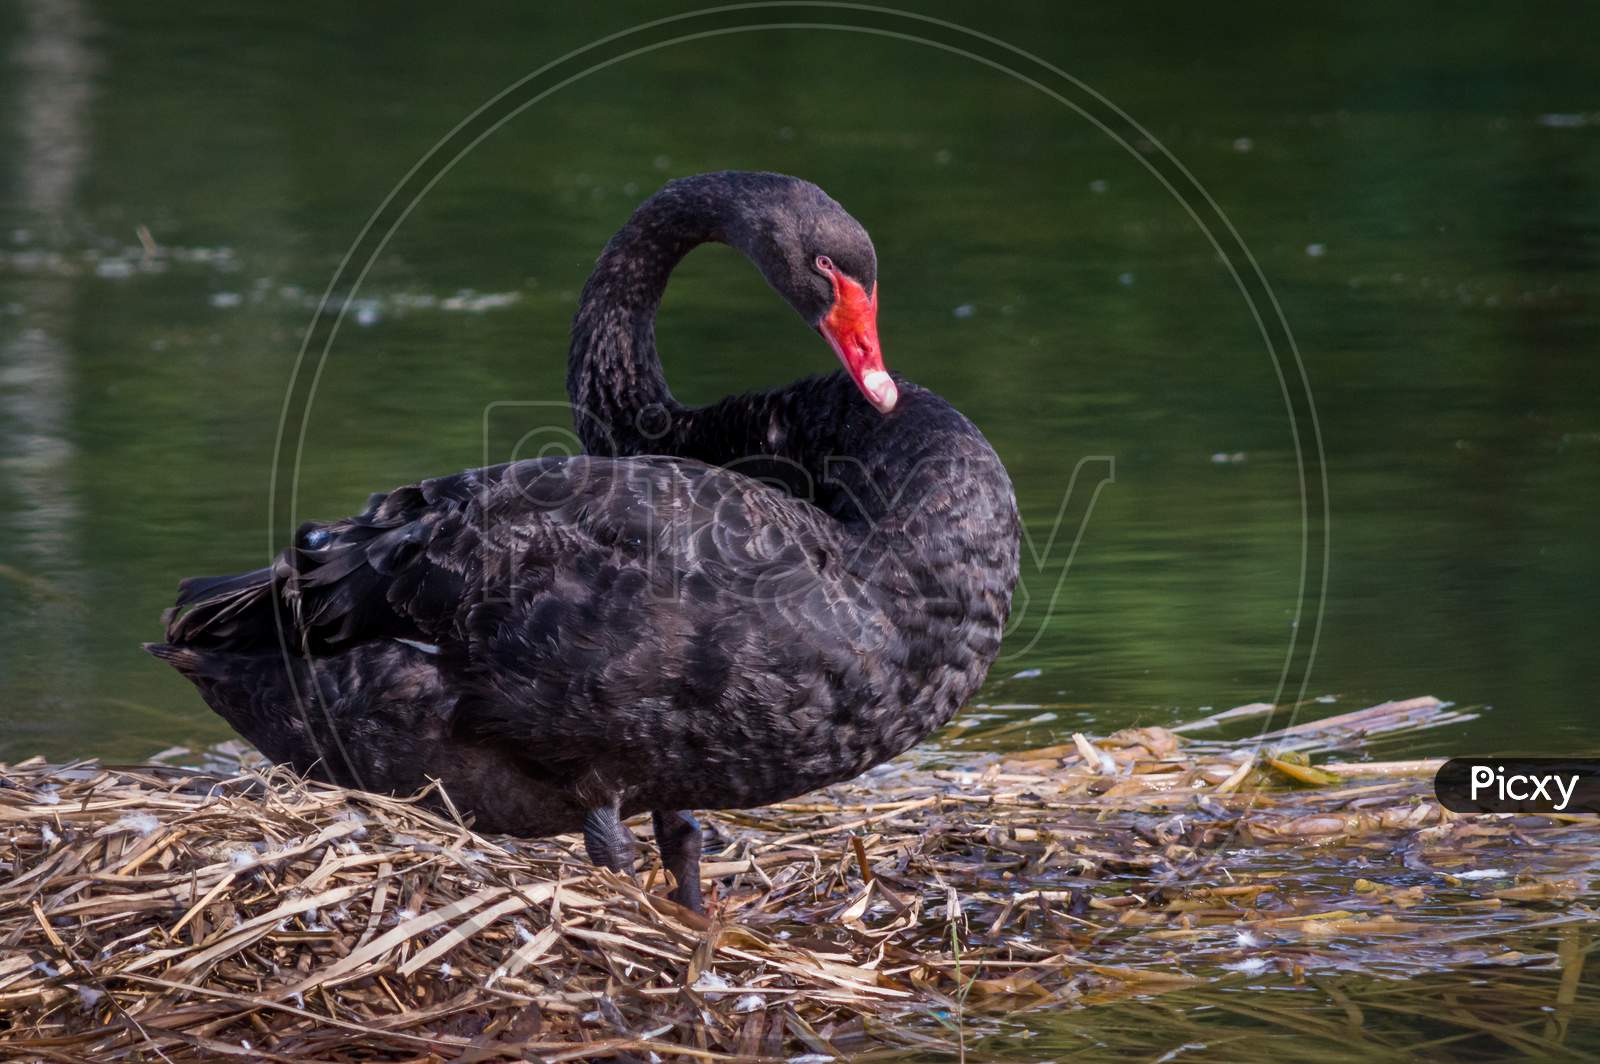 Black Swan On A Small Grass Island In The Pond Of Water